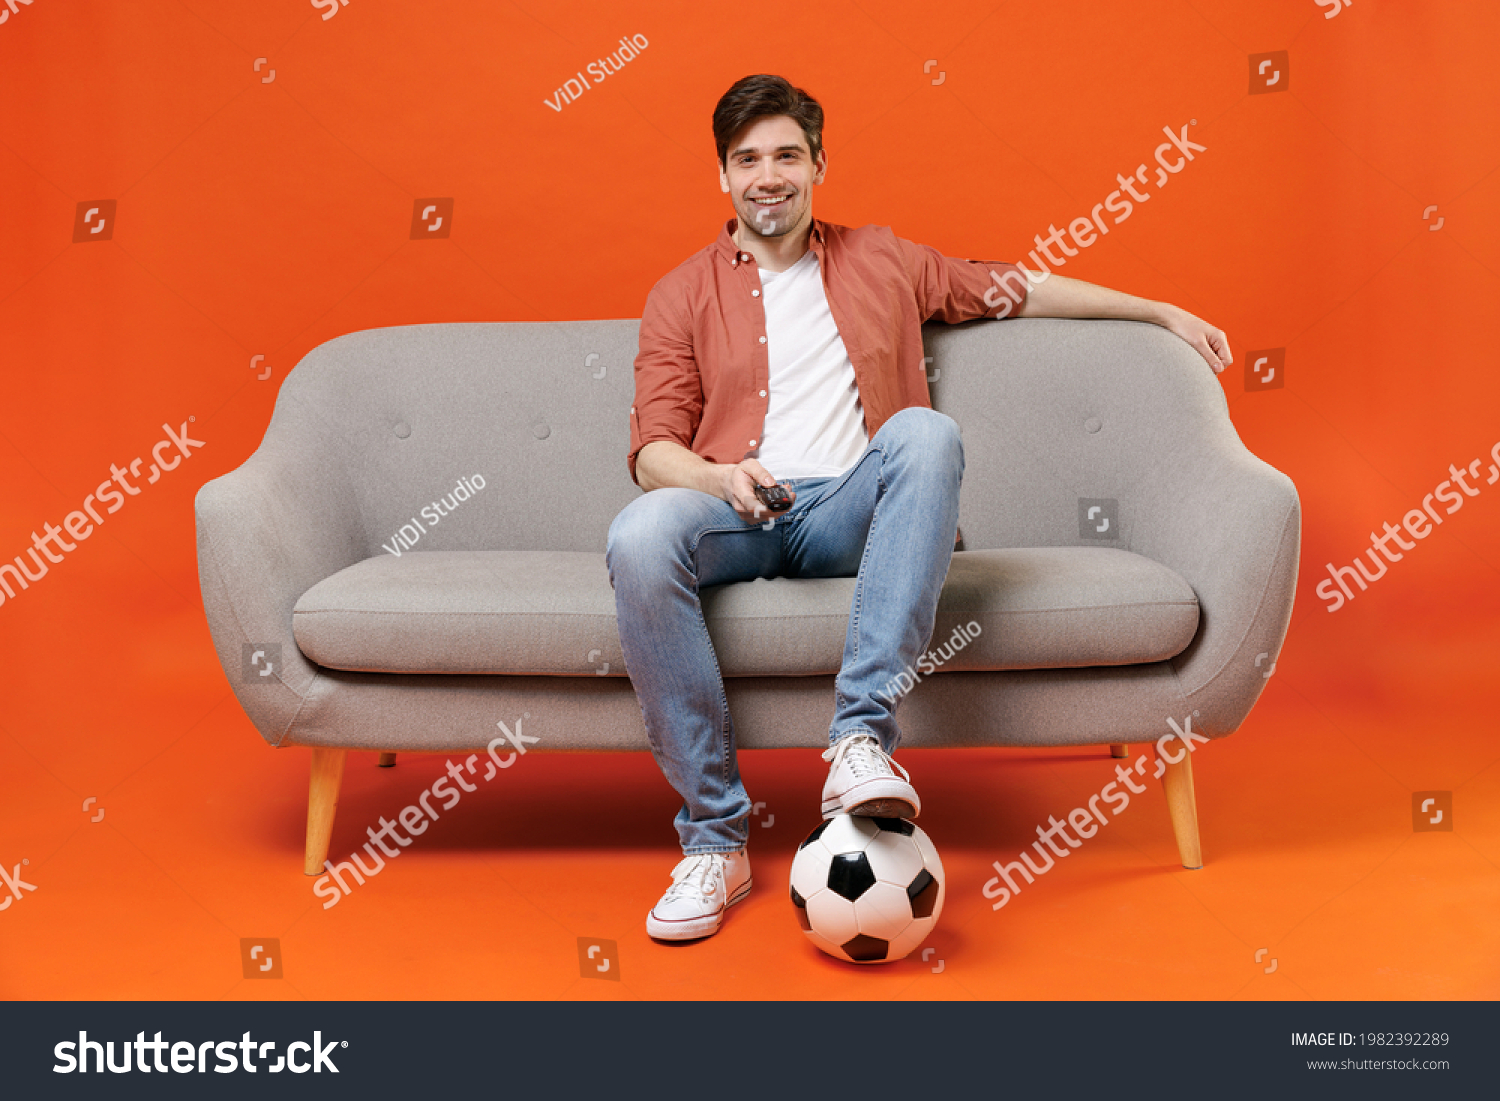 Young man football fan in shirt support favorite team with soccer ball sit on sofa at home watch tv live stream switch channel isolated on orange background. People sport leisure lifestyle concept. #1982392289